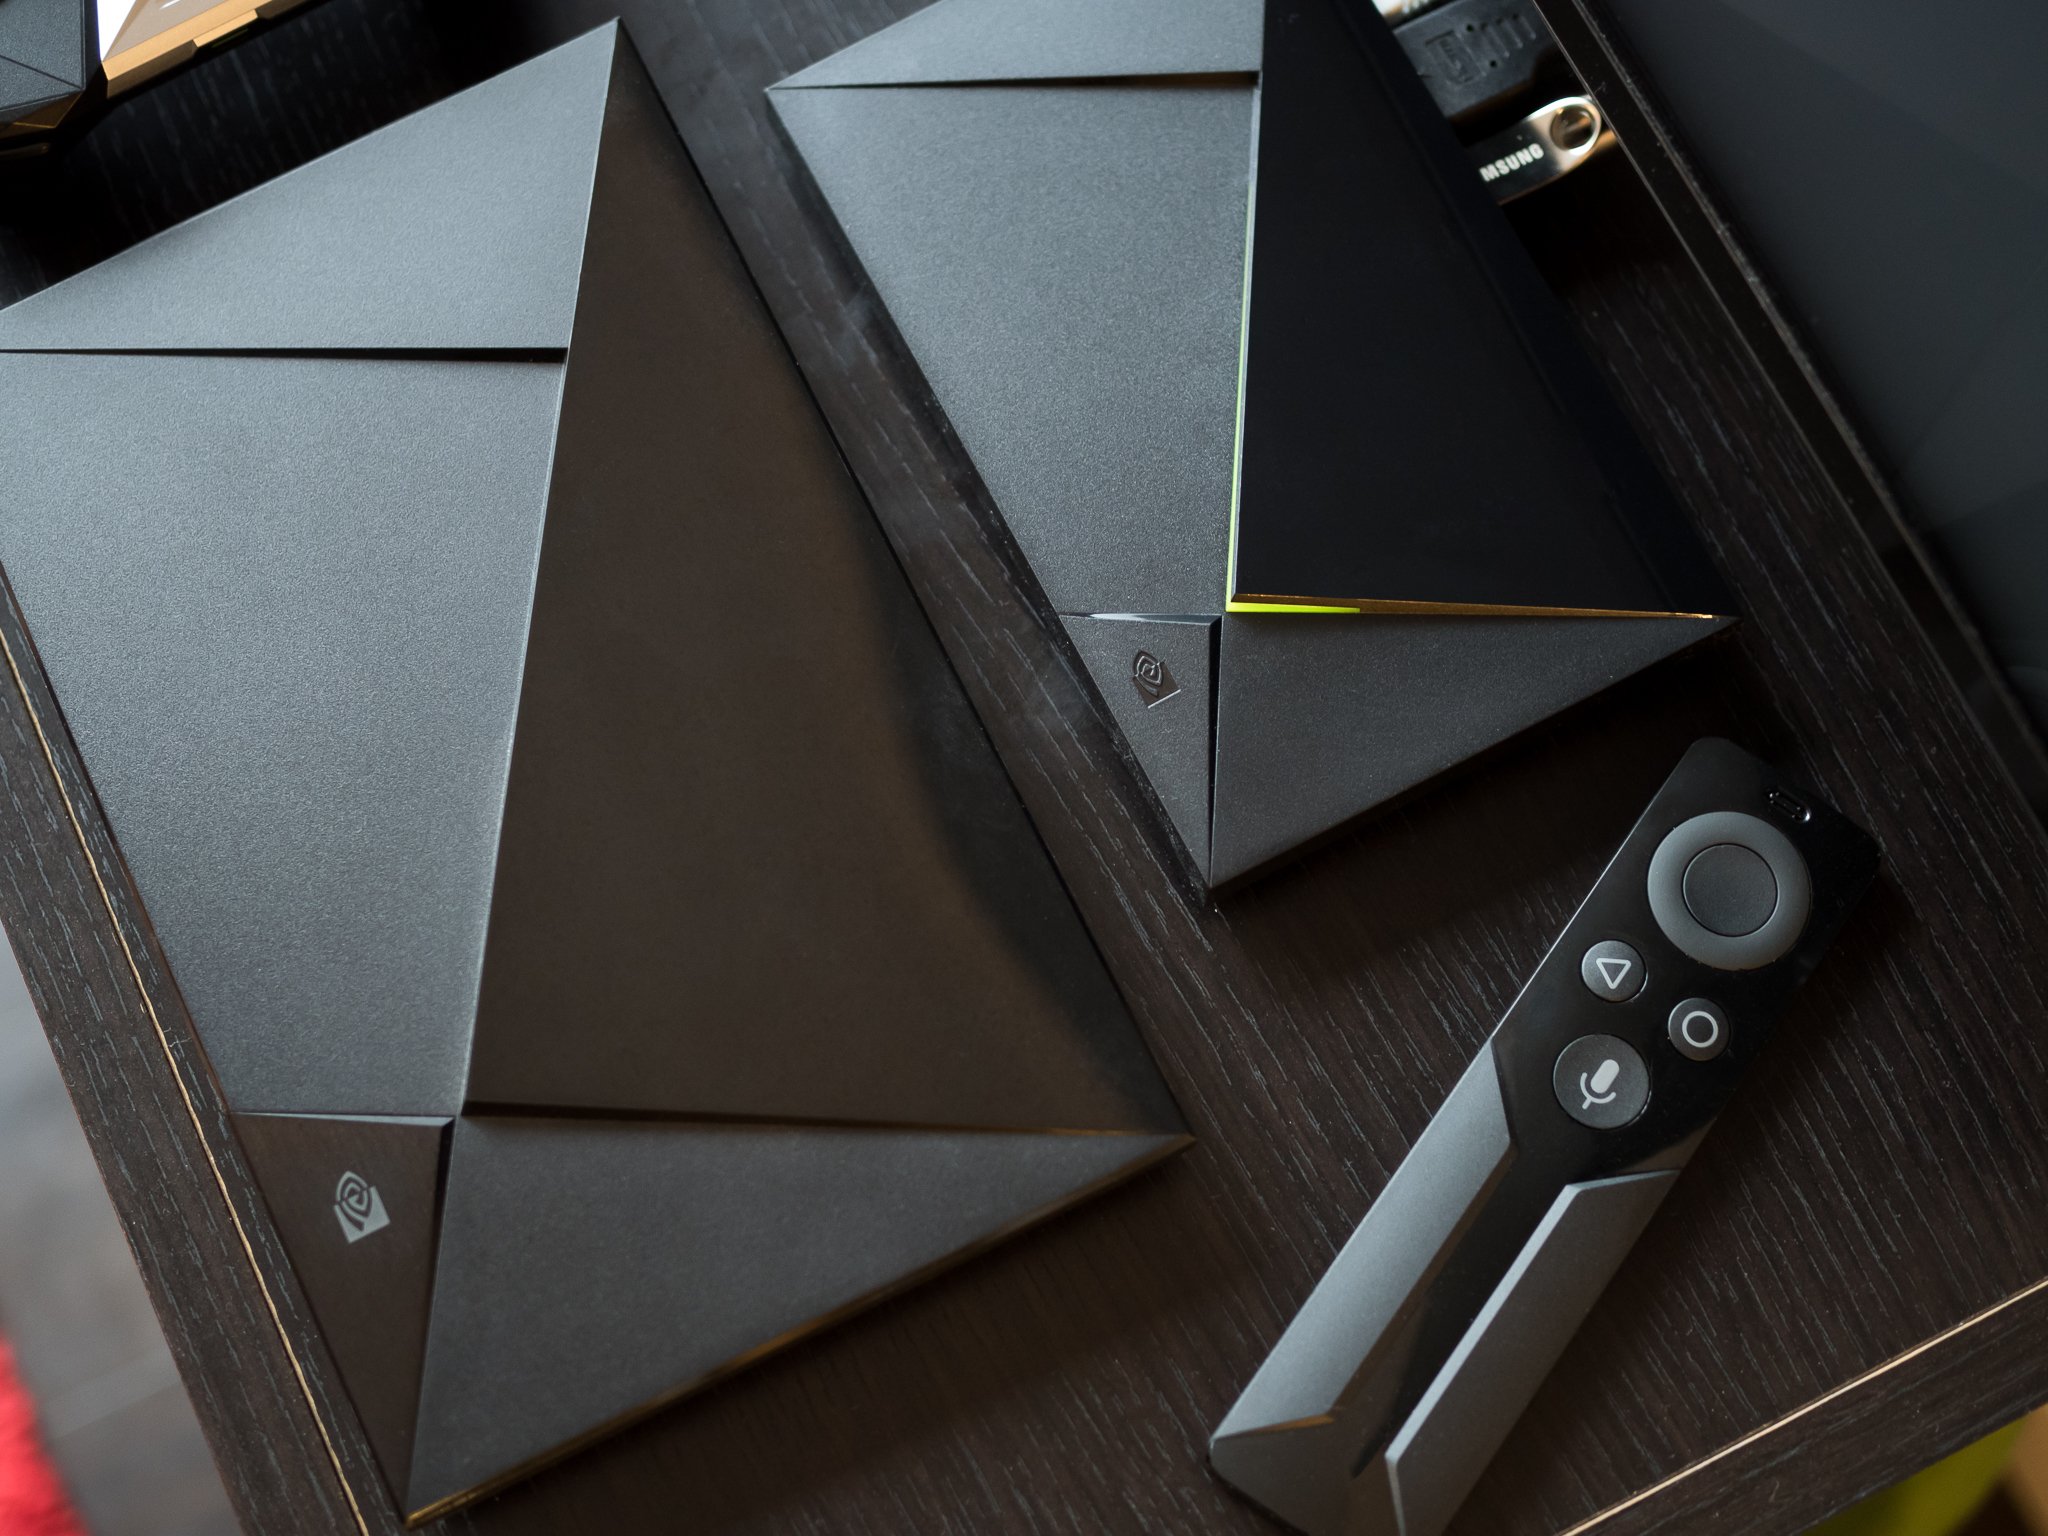 NVIDIA is actually working on two new Shield TV devices | Android